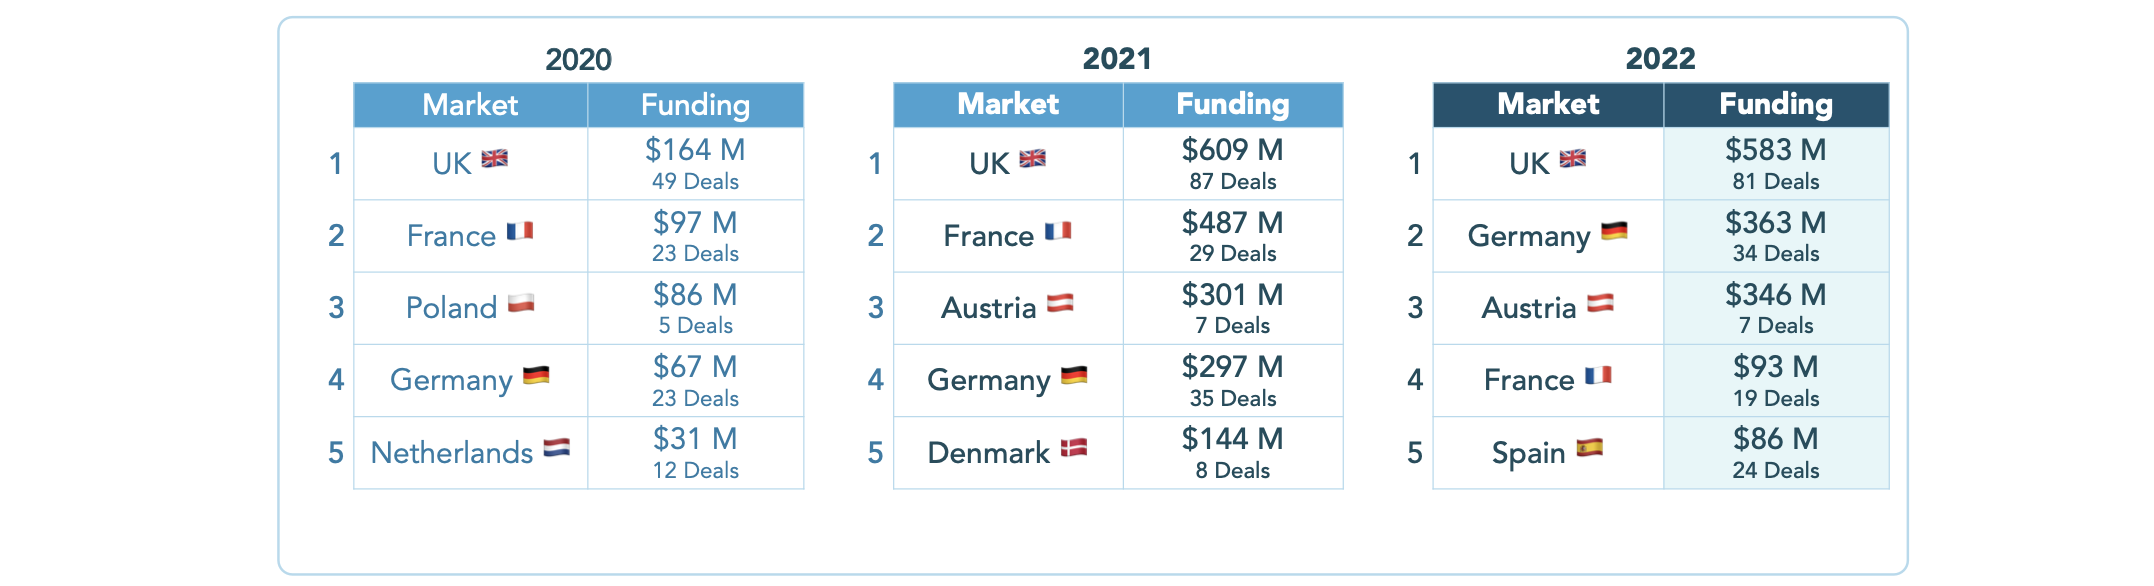 Edtech funding in Europe by market. Image Credits: Brighteye Ventures